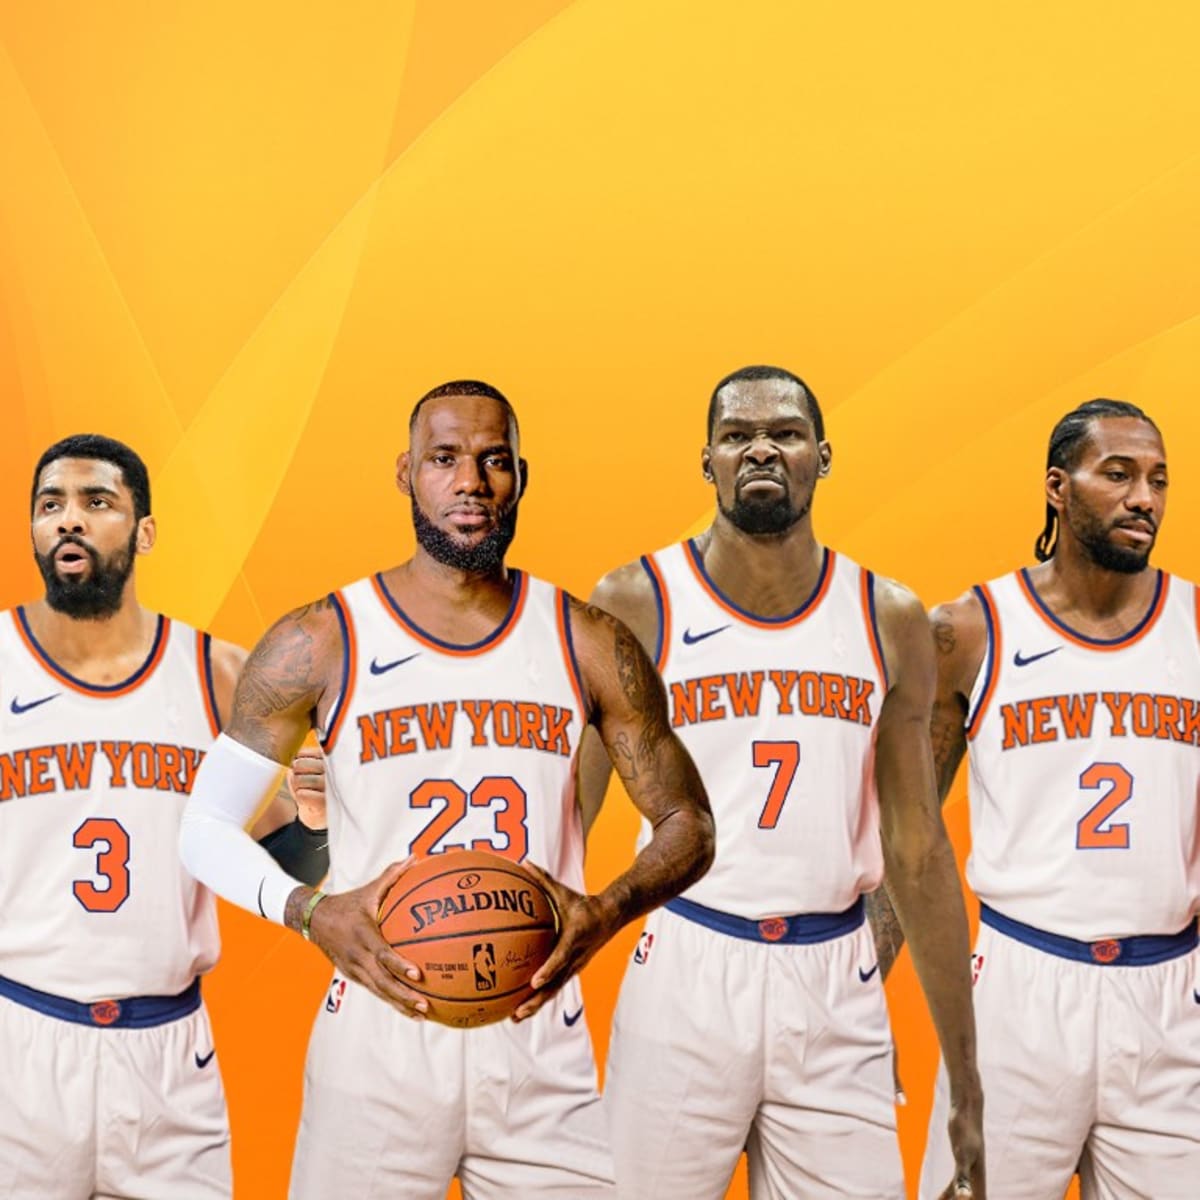 The New York Knicks Are The Weakest Link In The NBA: Former NBA